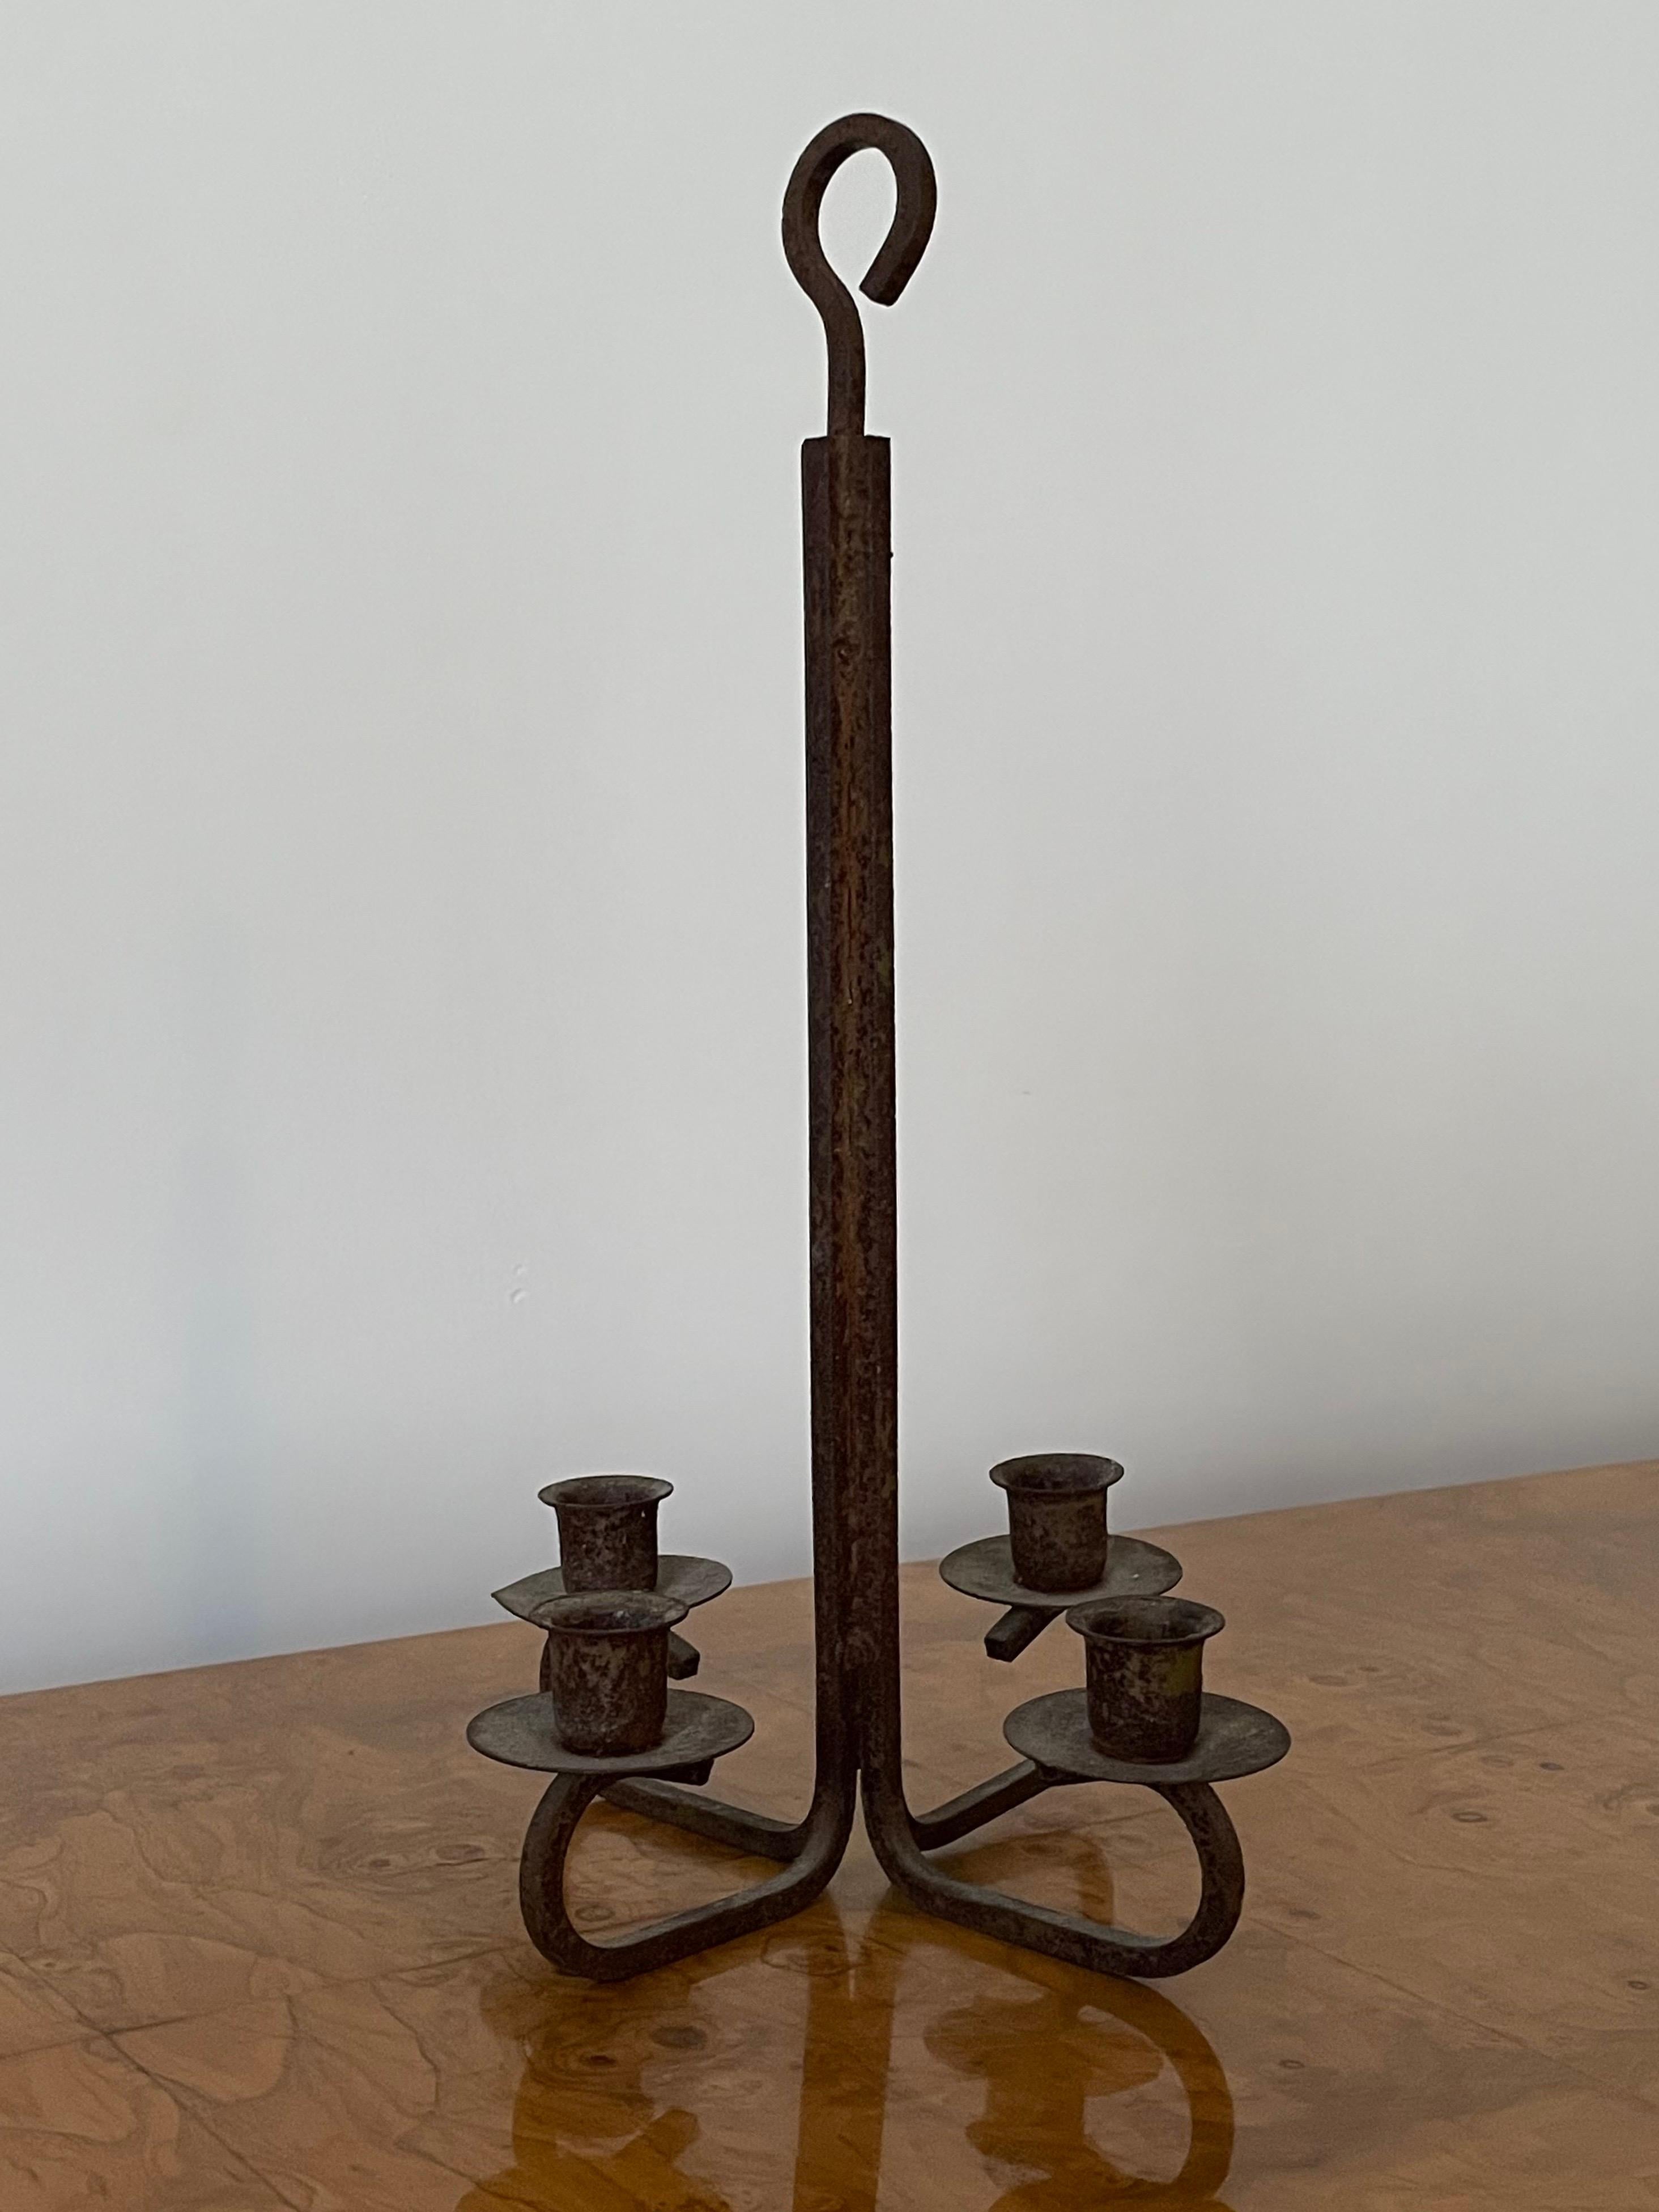 Late 20th Century American Modernist Patinated Wrought Iron Candelbra For Sale